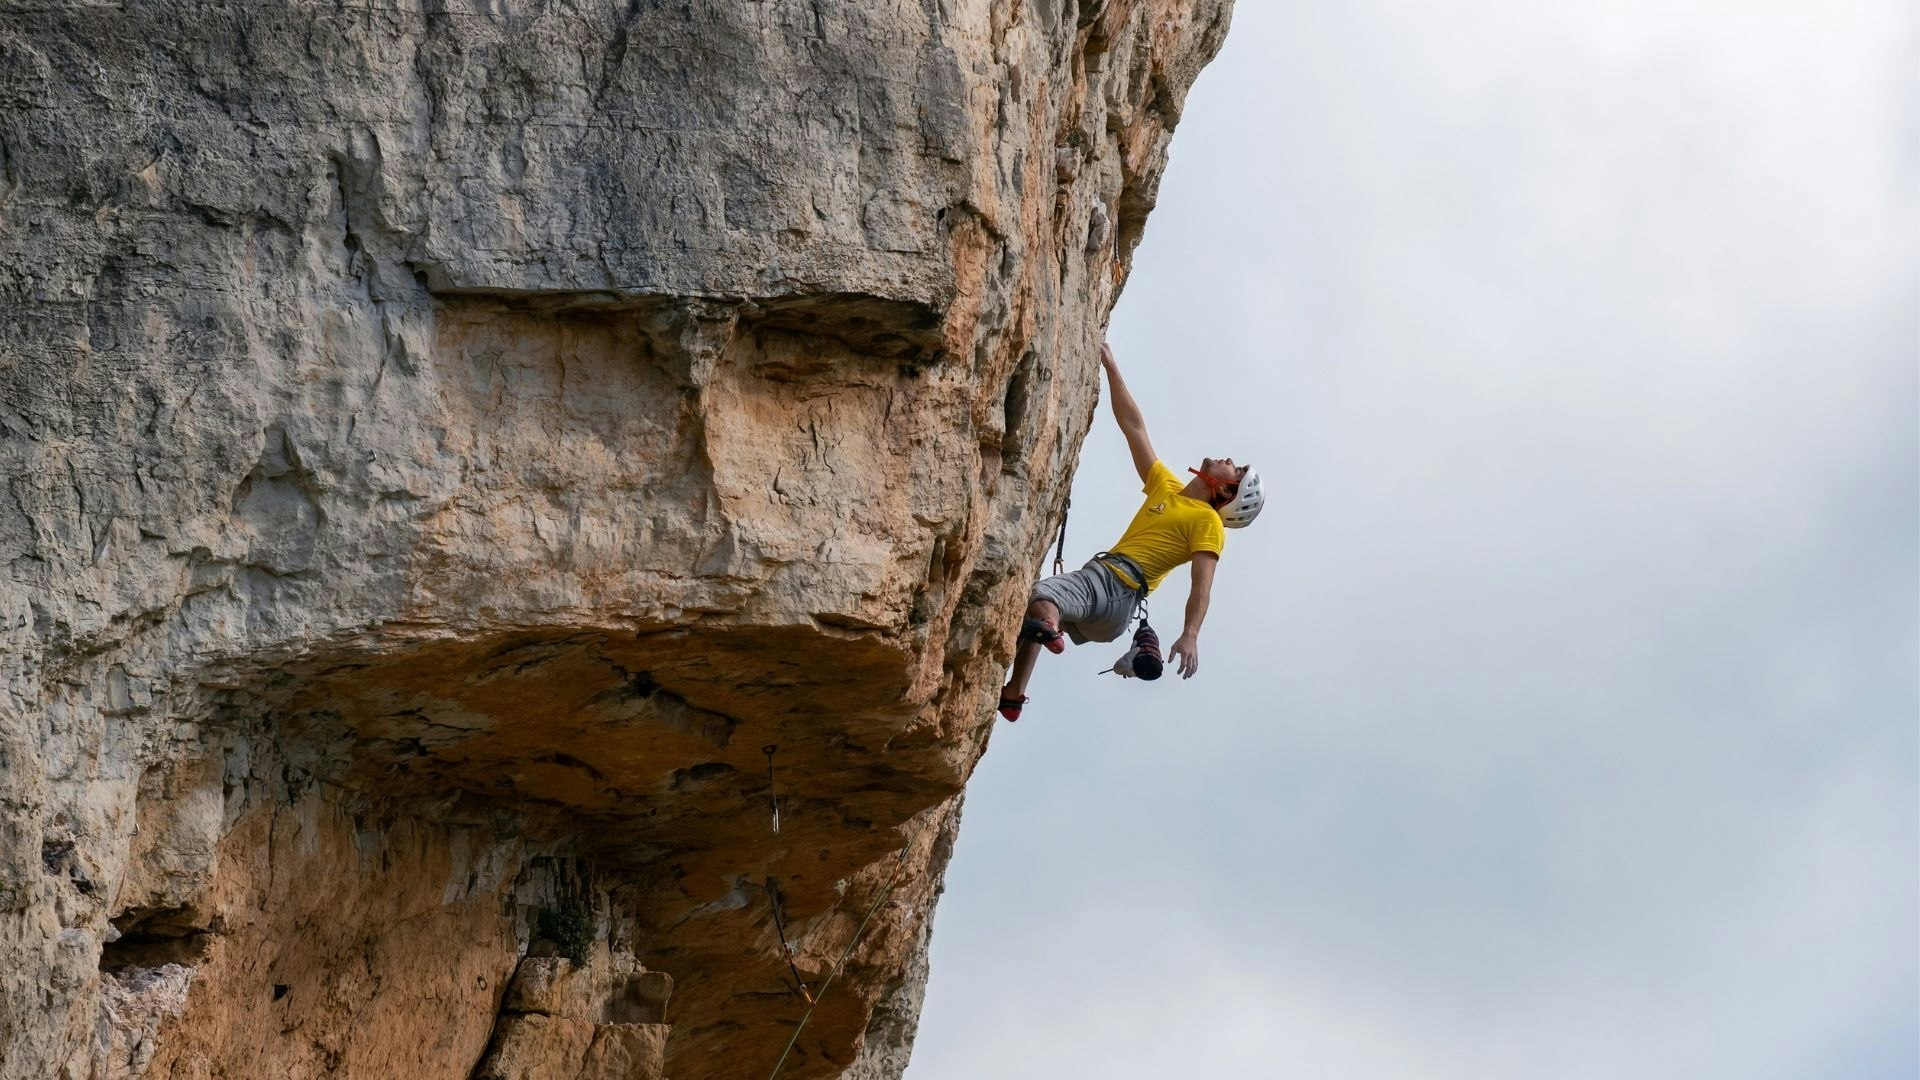 Rock Climber From Story, Wyoming, Competing In HBO Series “The Climb”